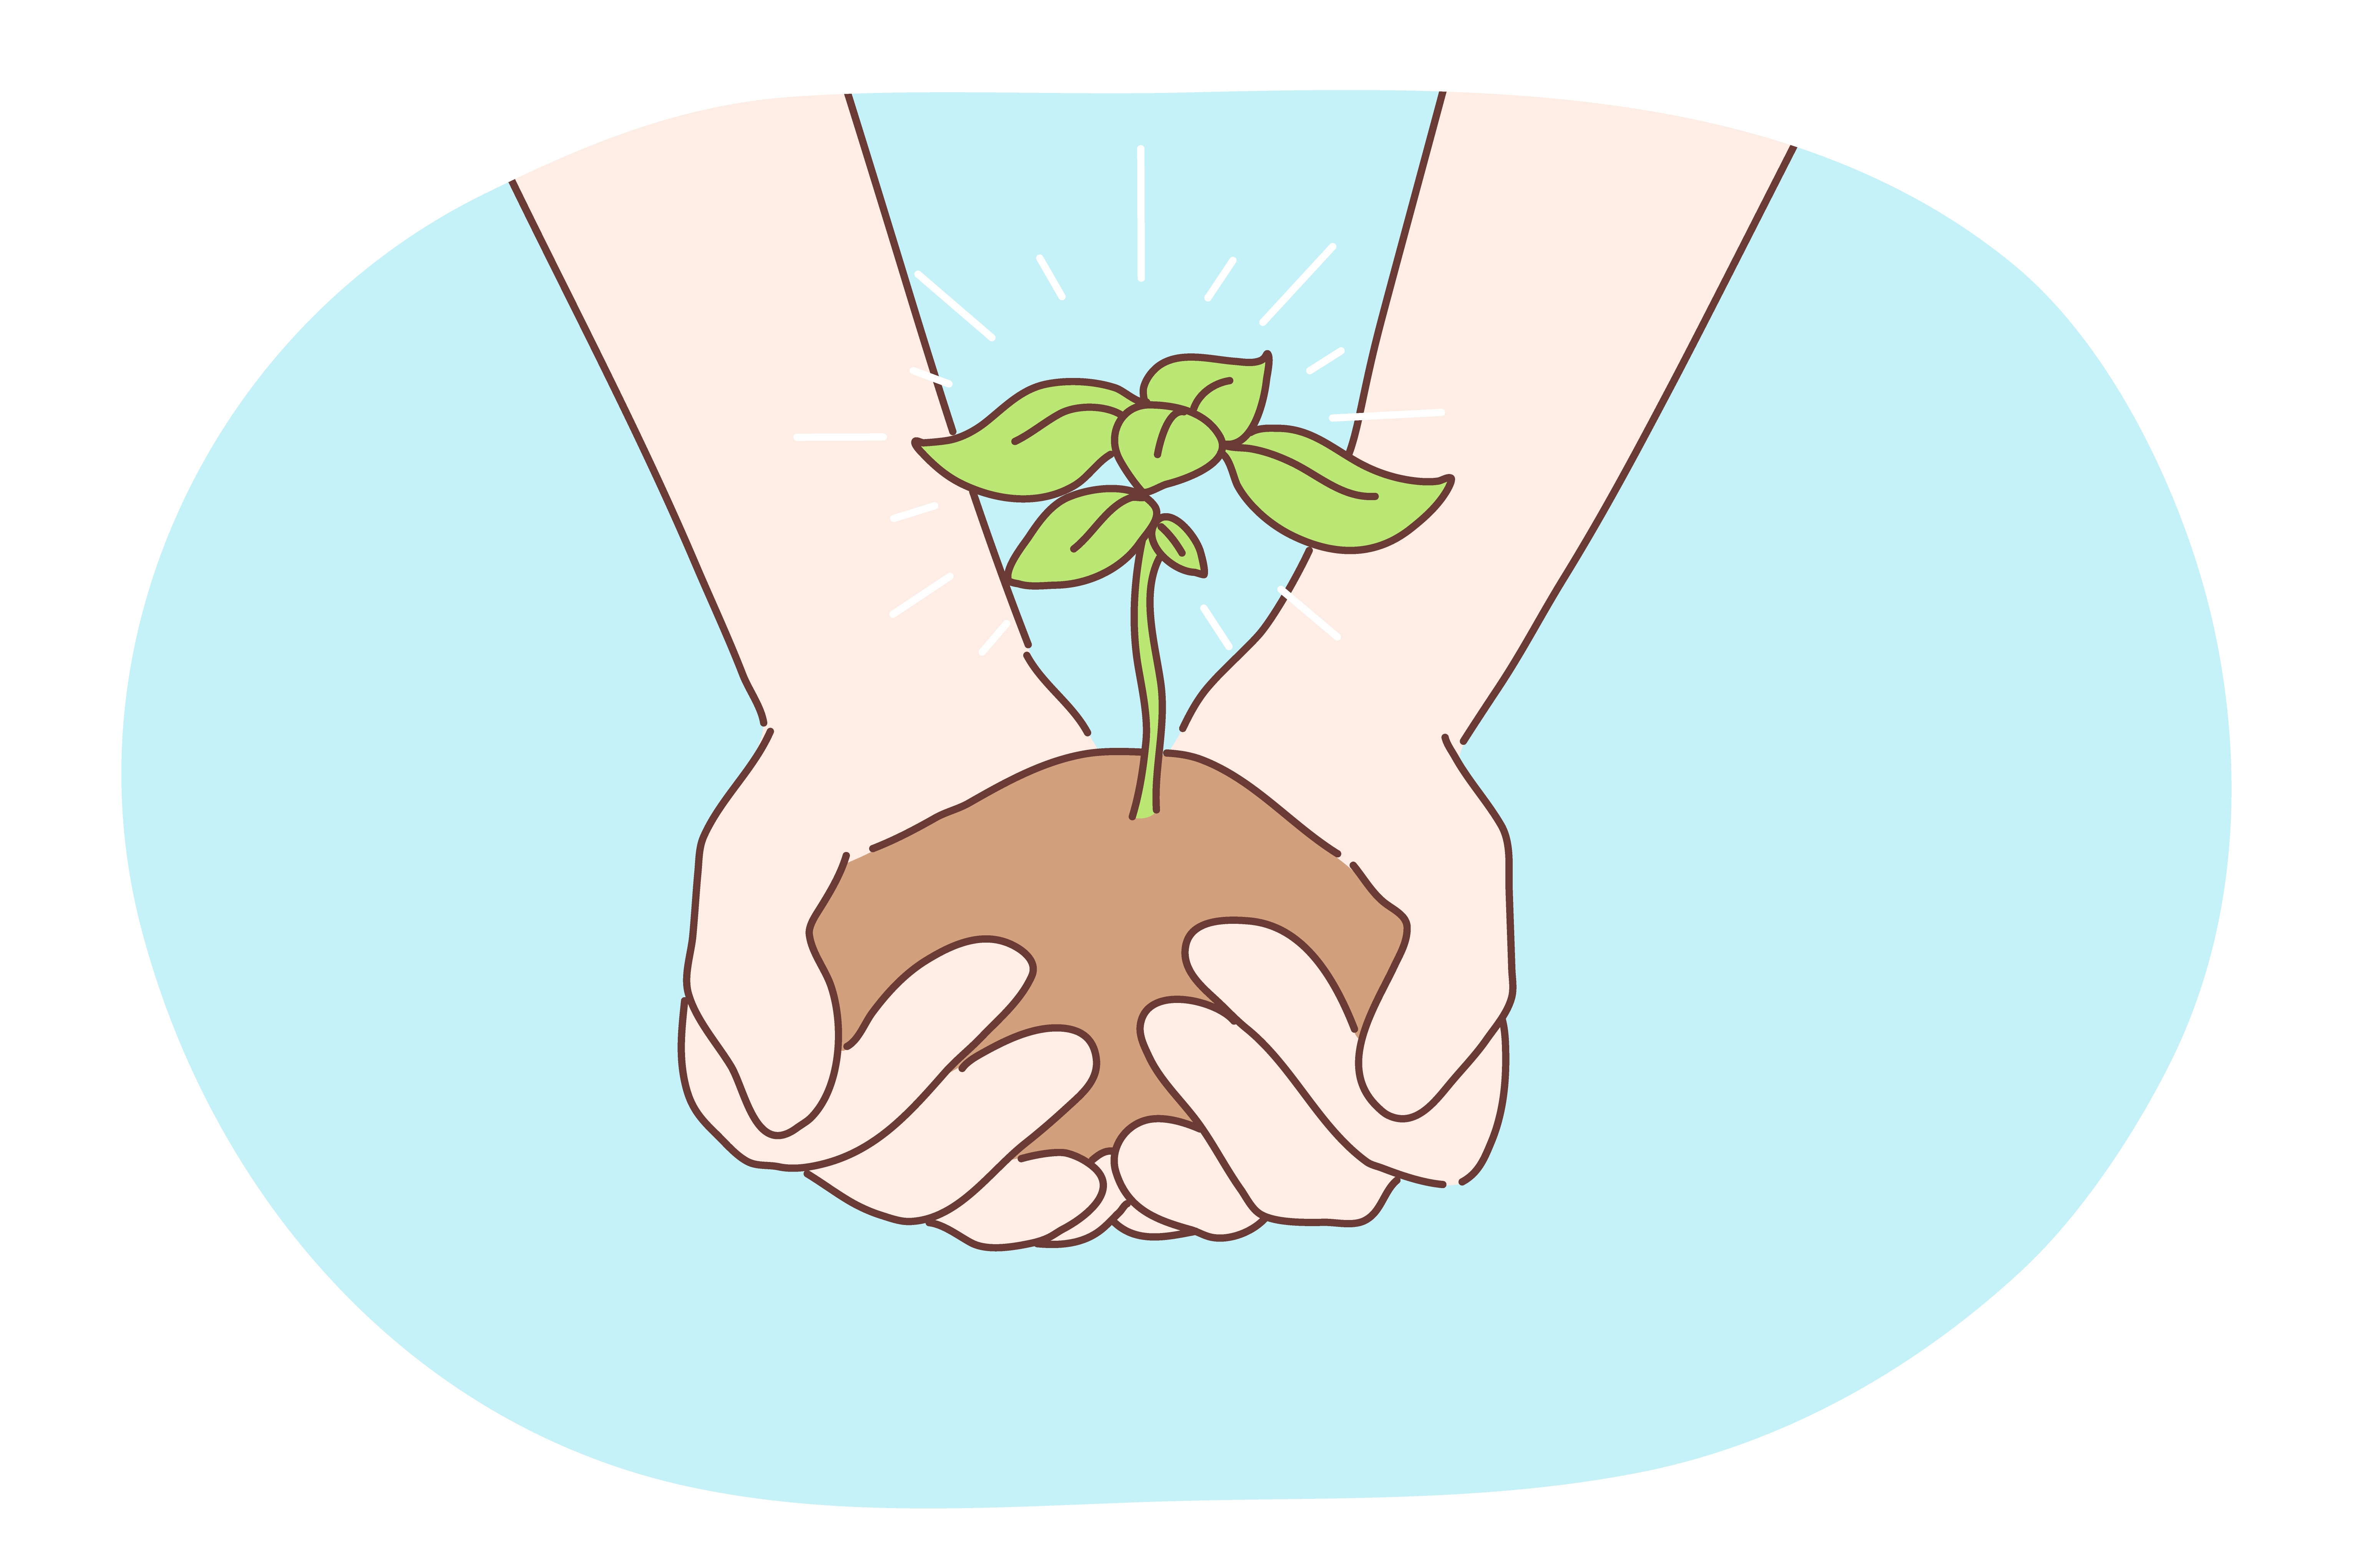 Ecology, charity, environment, earth day concept. Human character hands holding growing sapling or plant. Nature protection and bilogical enviromental friendly care or new life symbol illustration.. Ecology, charity, environment earth day concept